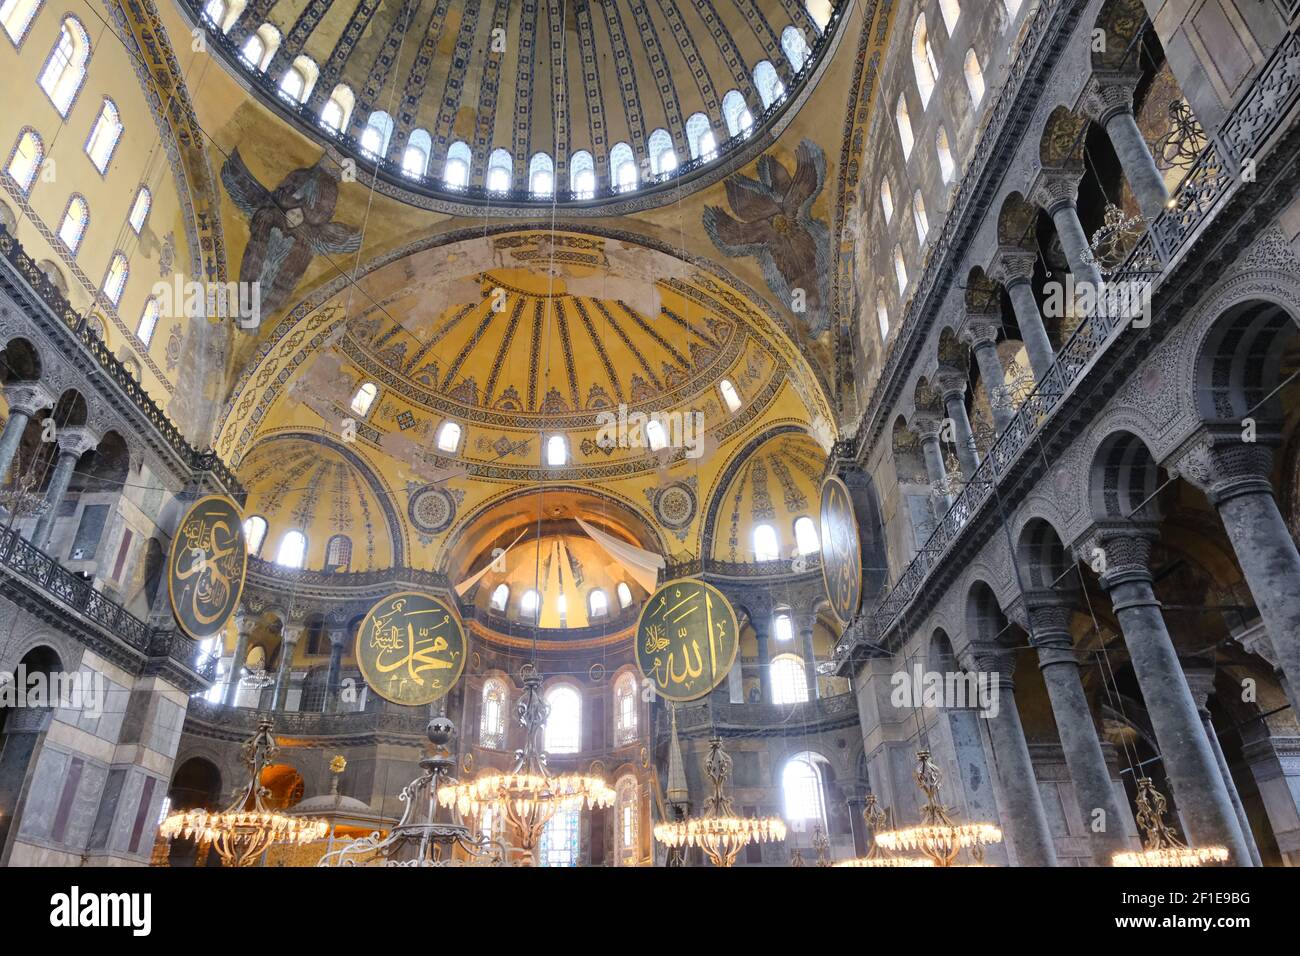 Hagia sophia mosque inside.many etching and gravures name of prophet Muhammad, god, ancient candles. Architectural details of dome and ancient windows Stock Photo